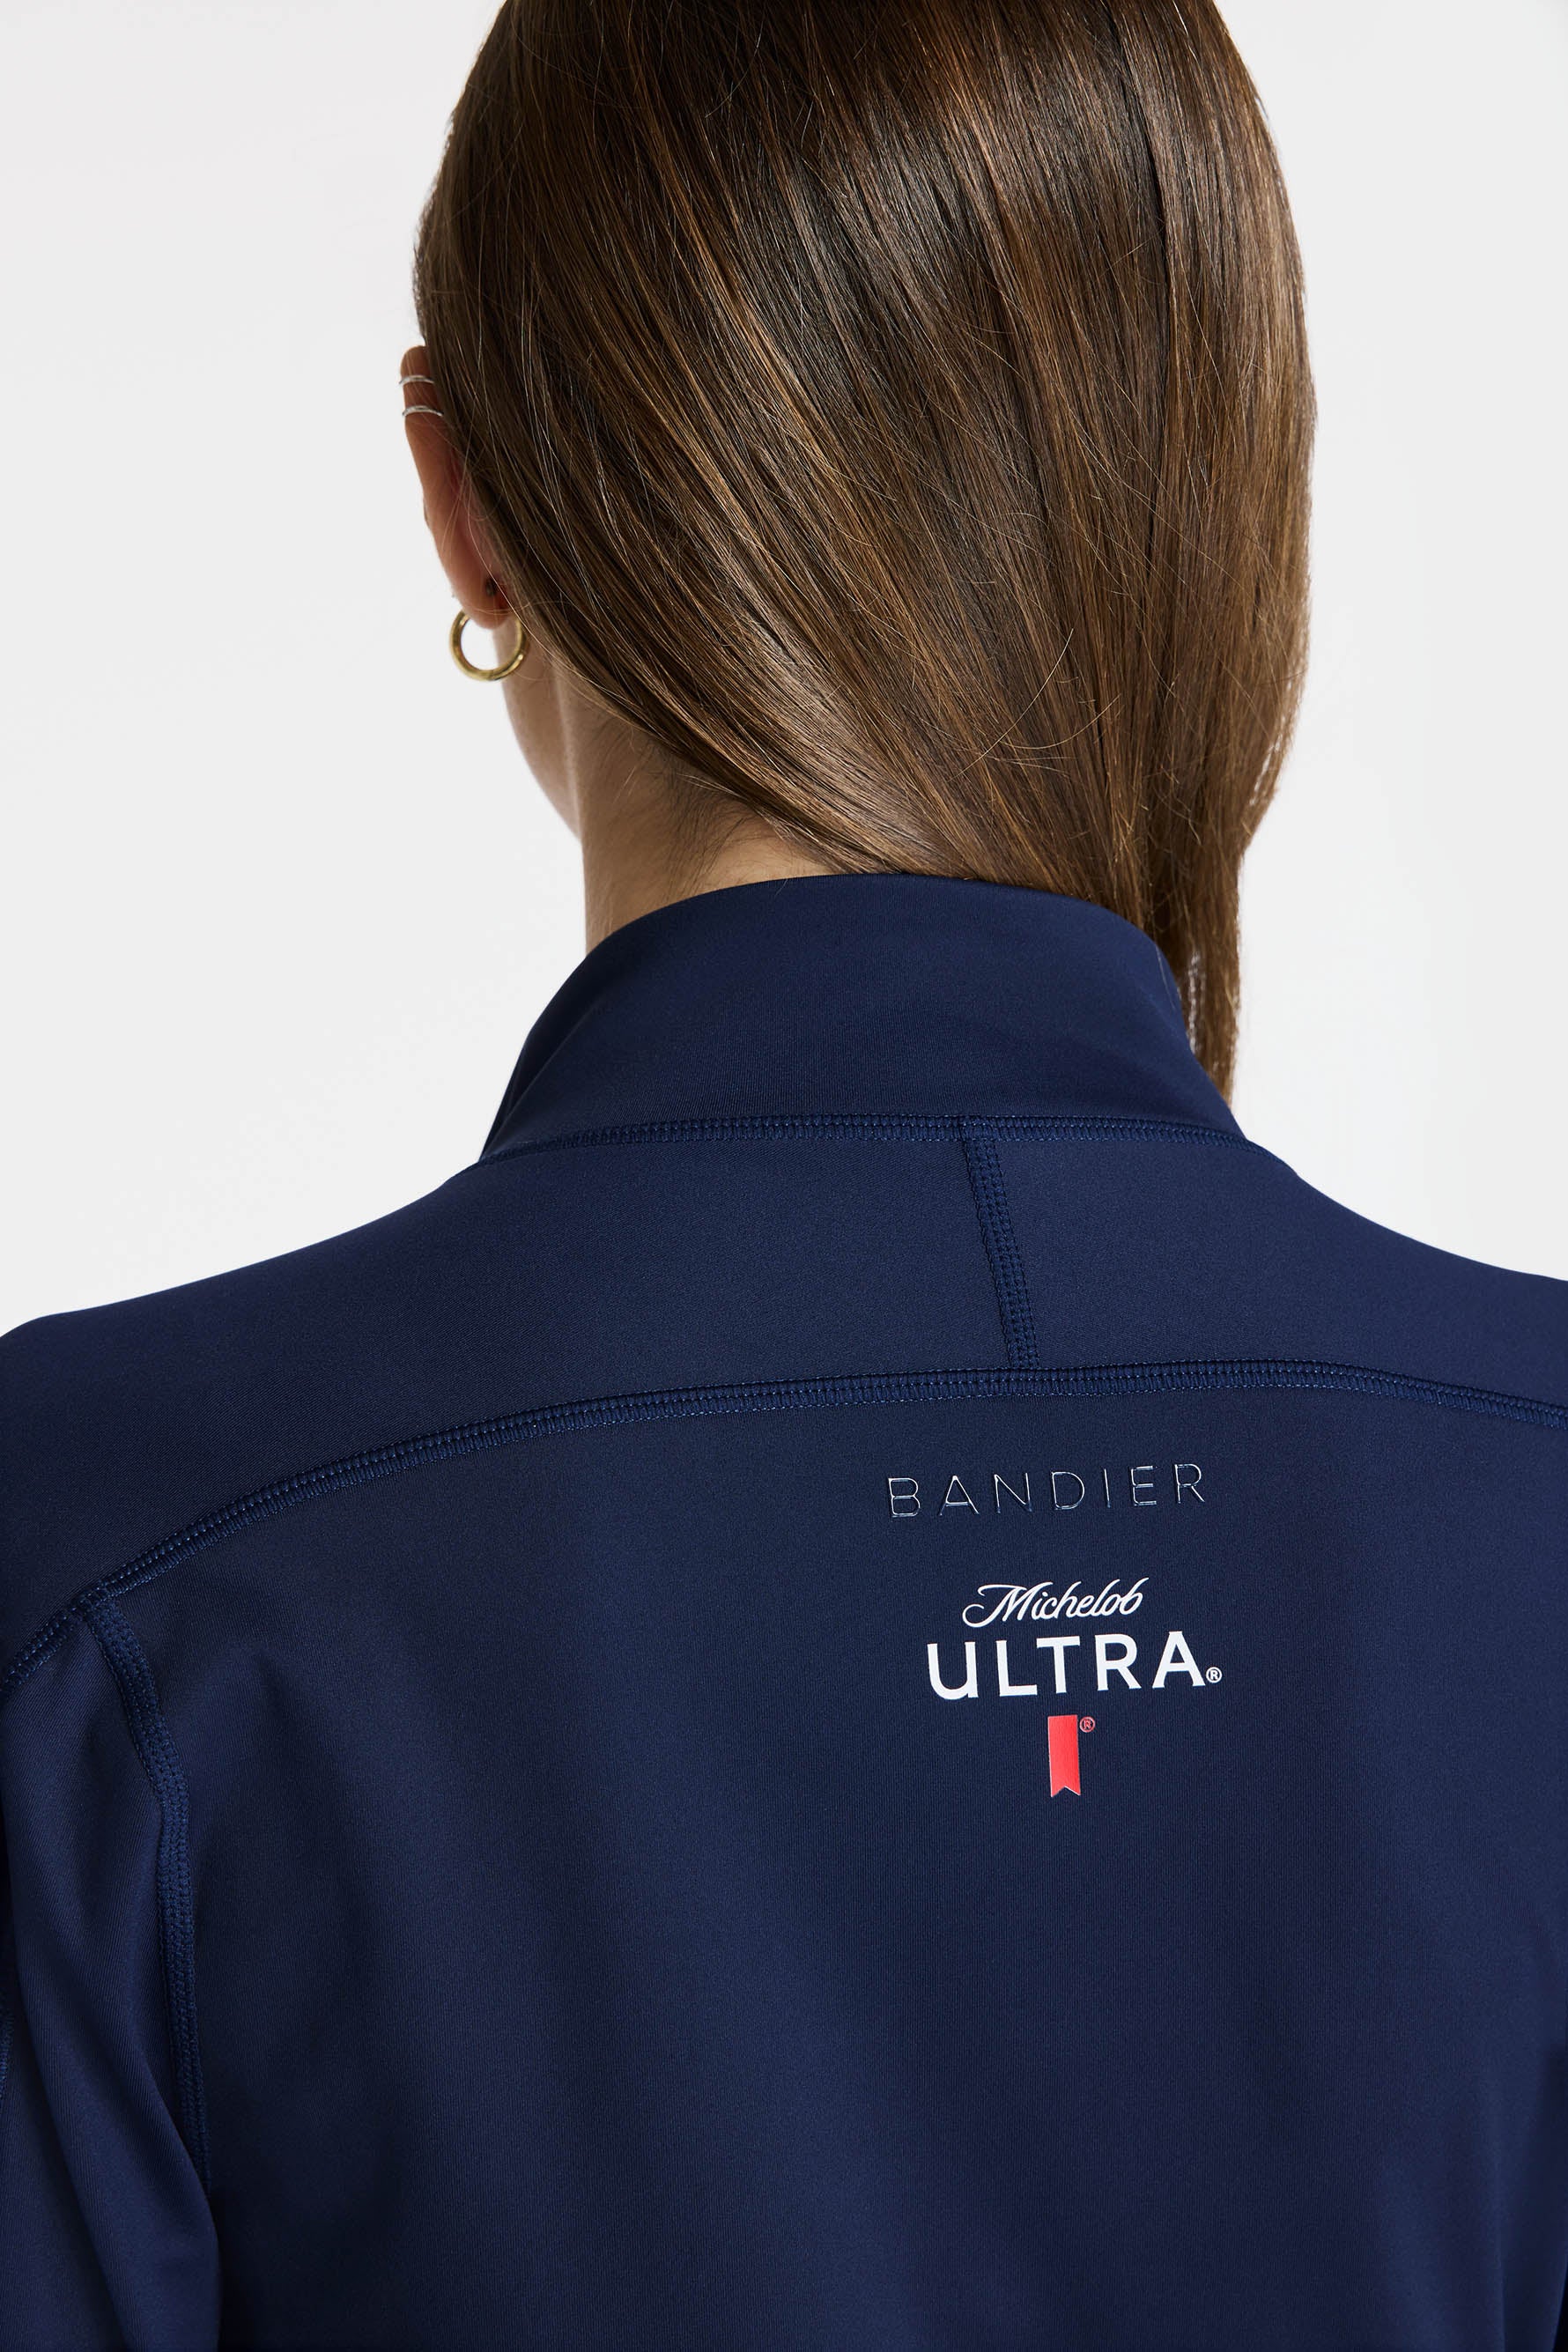 Back view of a model wearing Bandier x Michelob ULTRA Full Zip Jacket, zoomed in on top half, Bandier and Michelob ULTRA branding on top center back